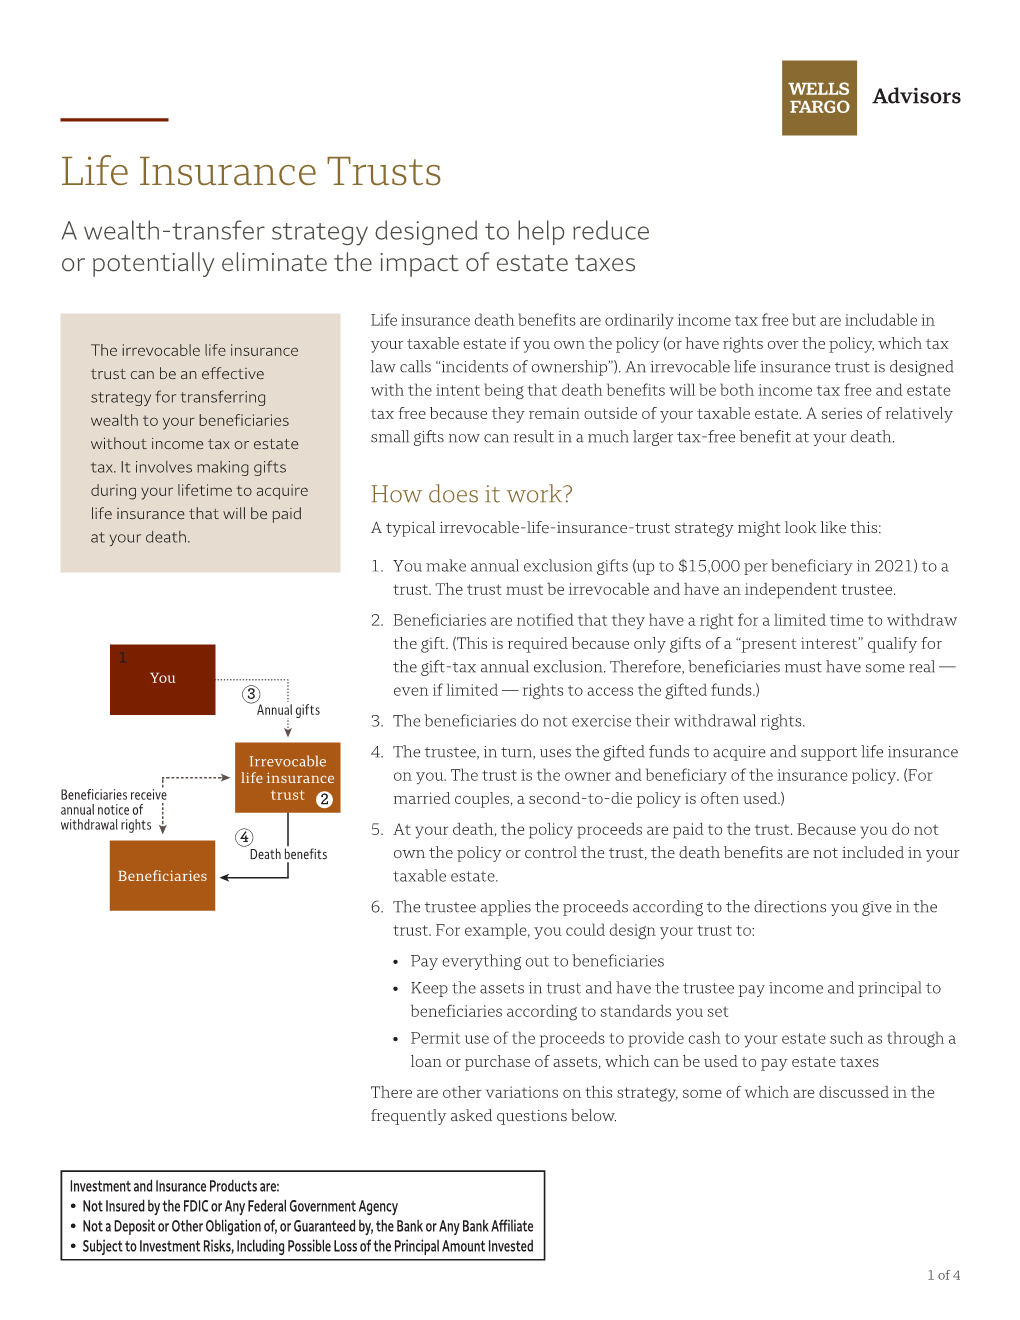 Life Insurance Trusts a Wealth-Transfer Strategy Designed to Help Reduce Or Potentially Eliminate the Impact of Estate Taxes